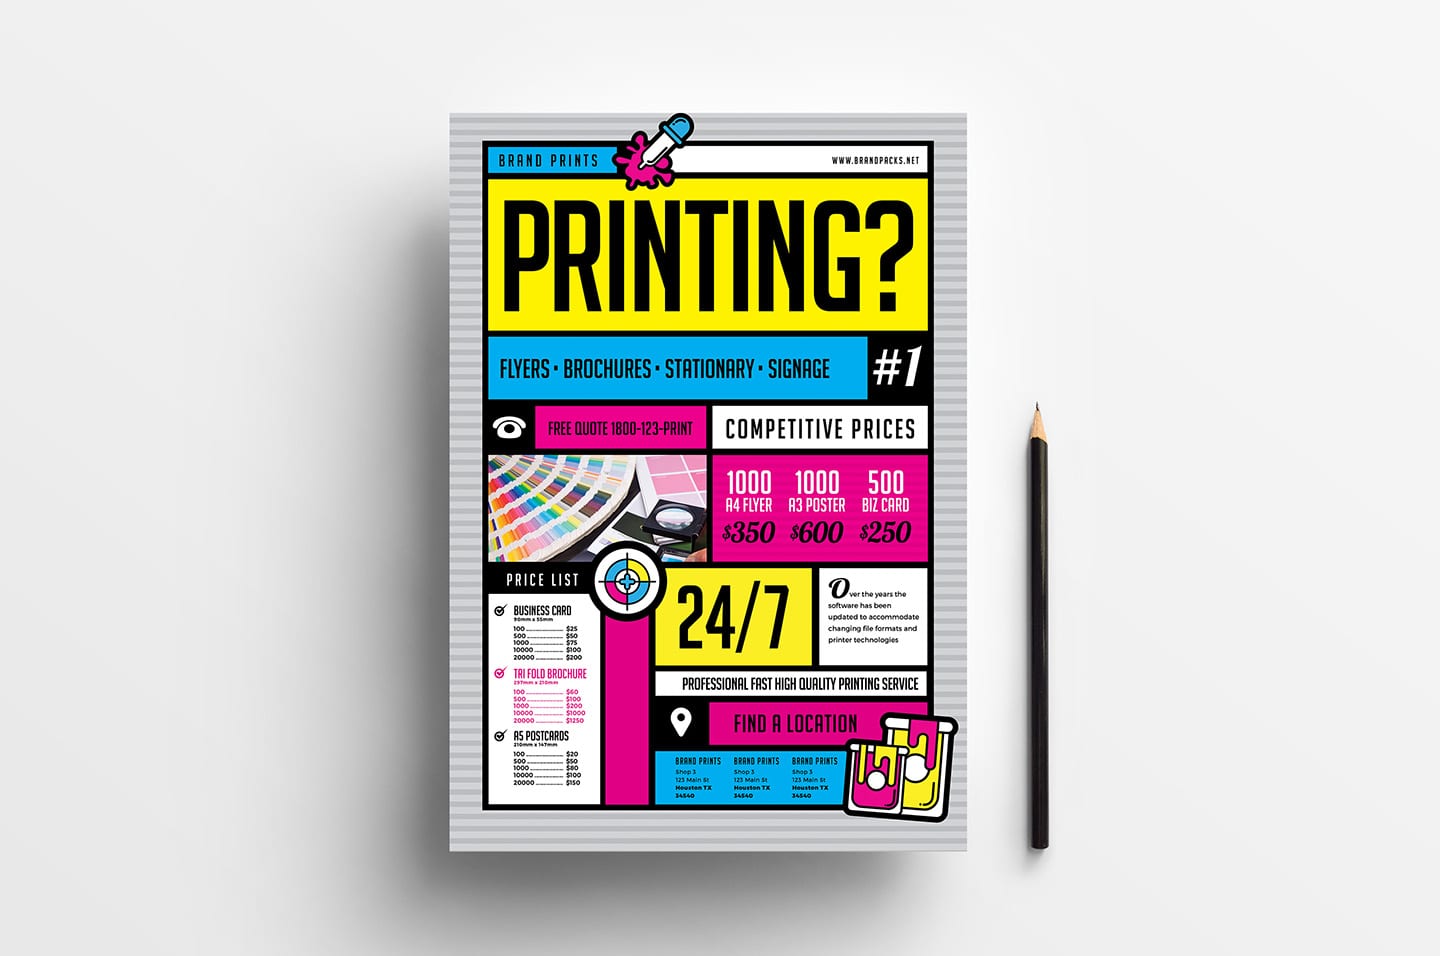 Free Print Shop Templates for Local Printing Services - BrandPacks